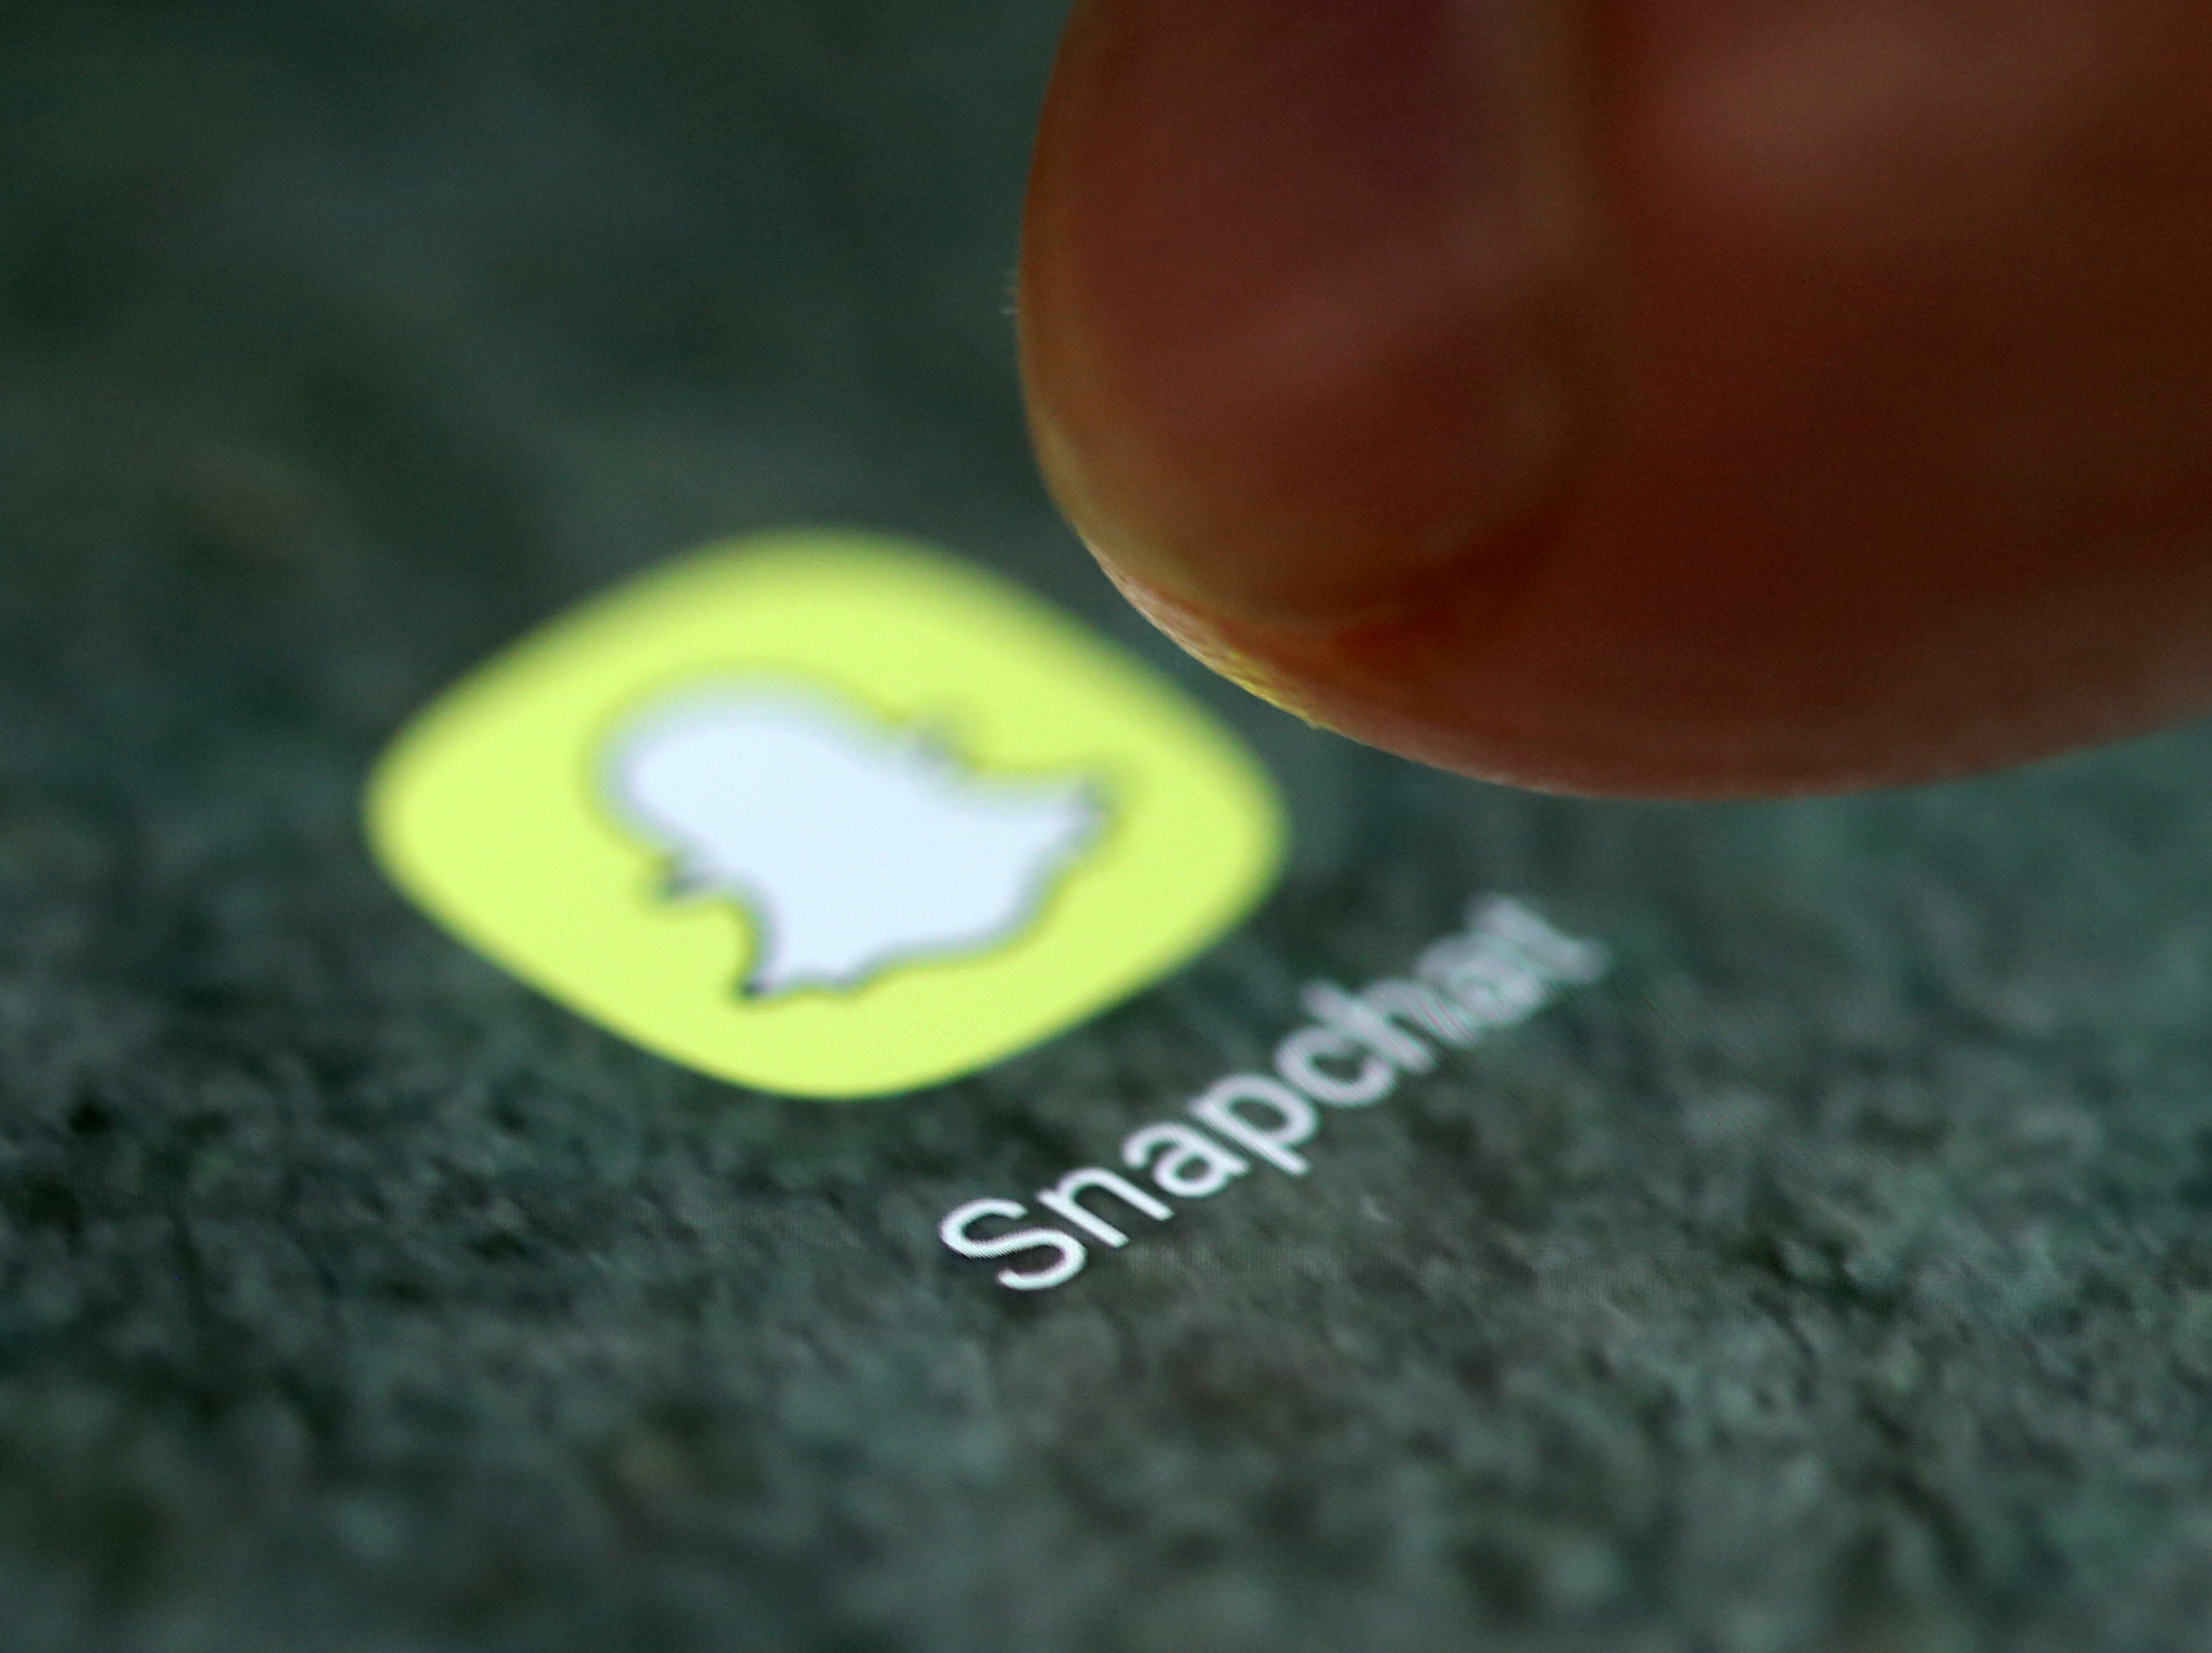 The Snapchat app logo is seen on a smartphone in this illustration